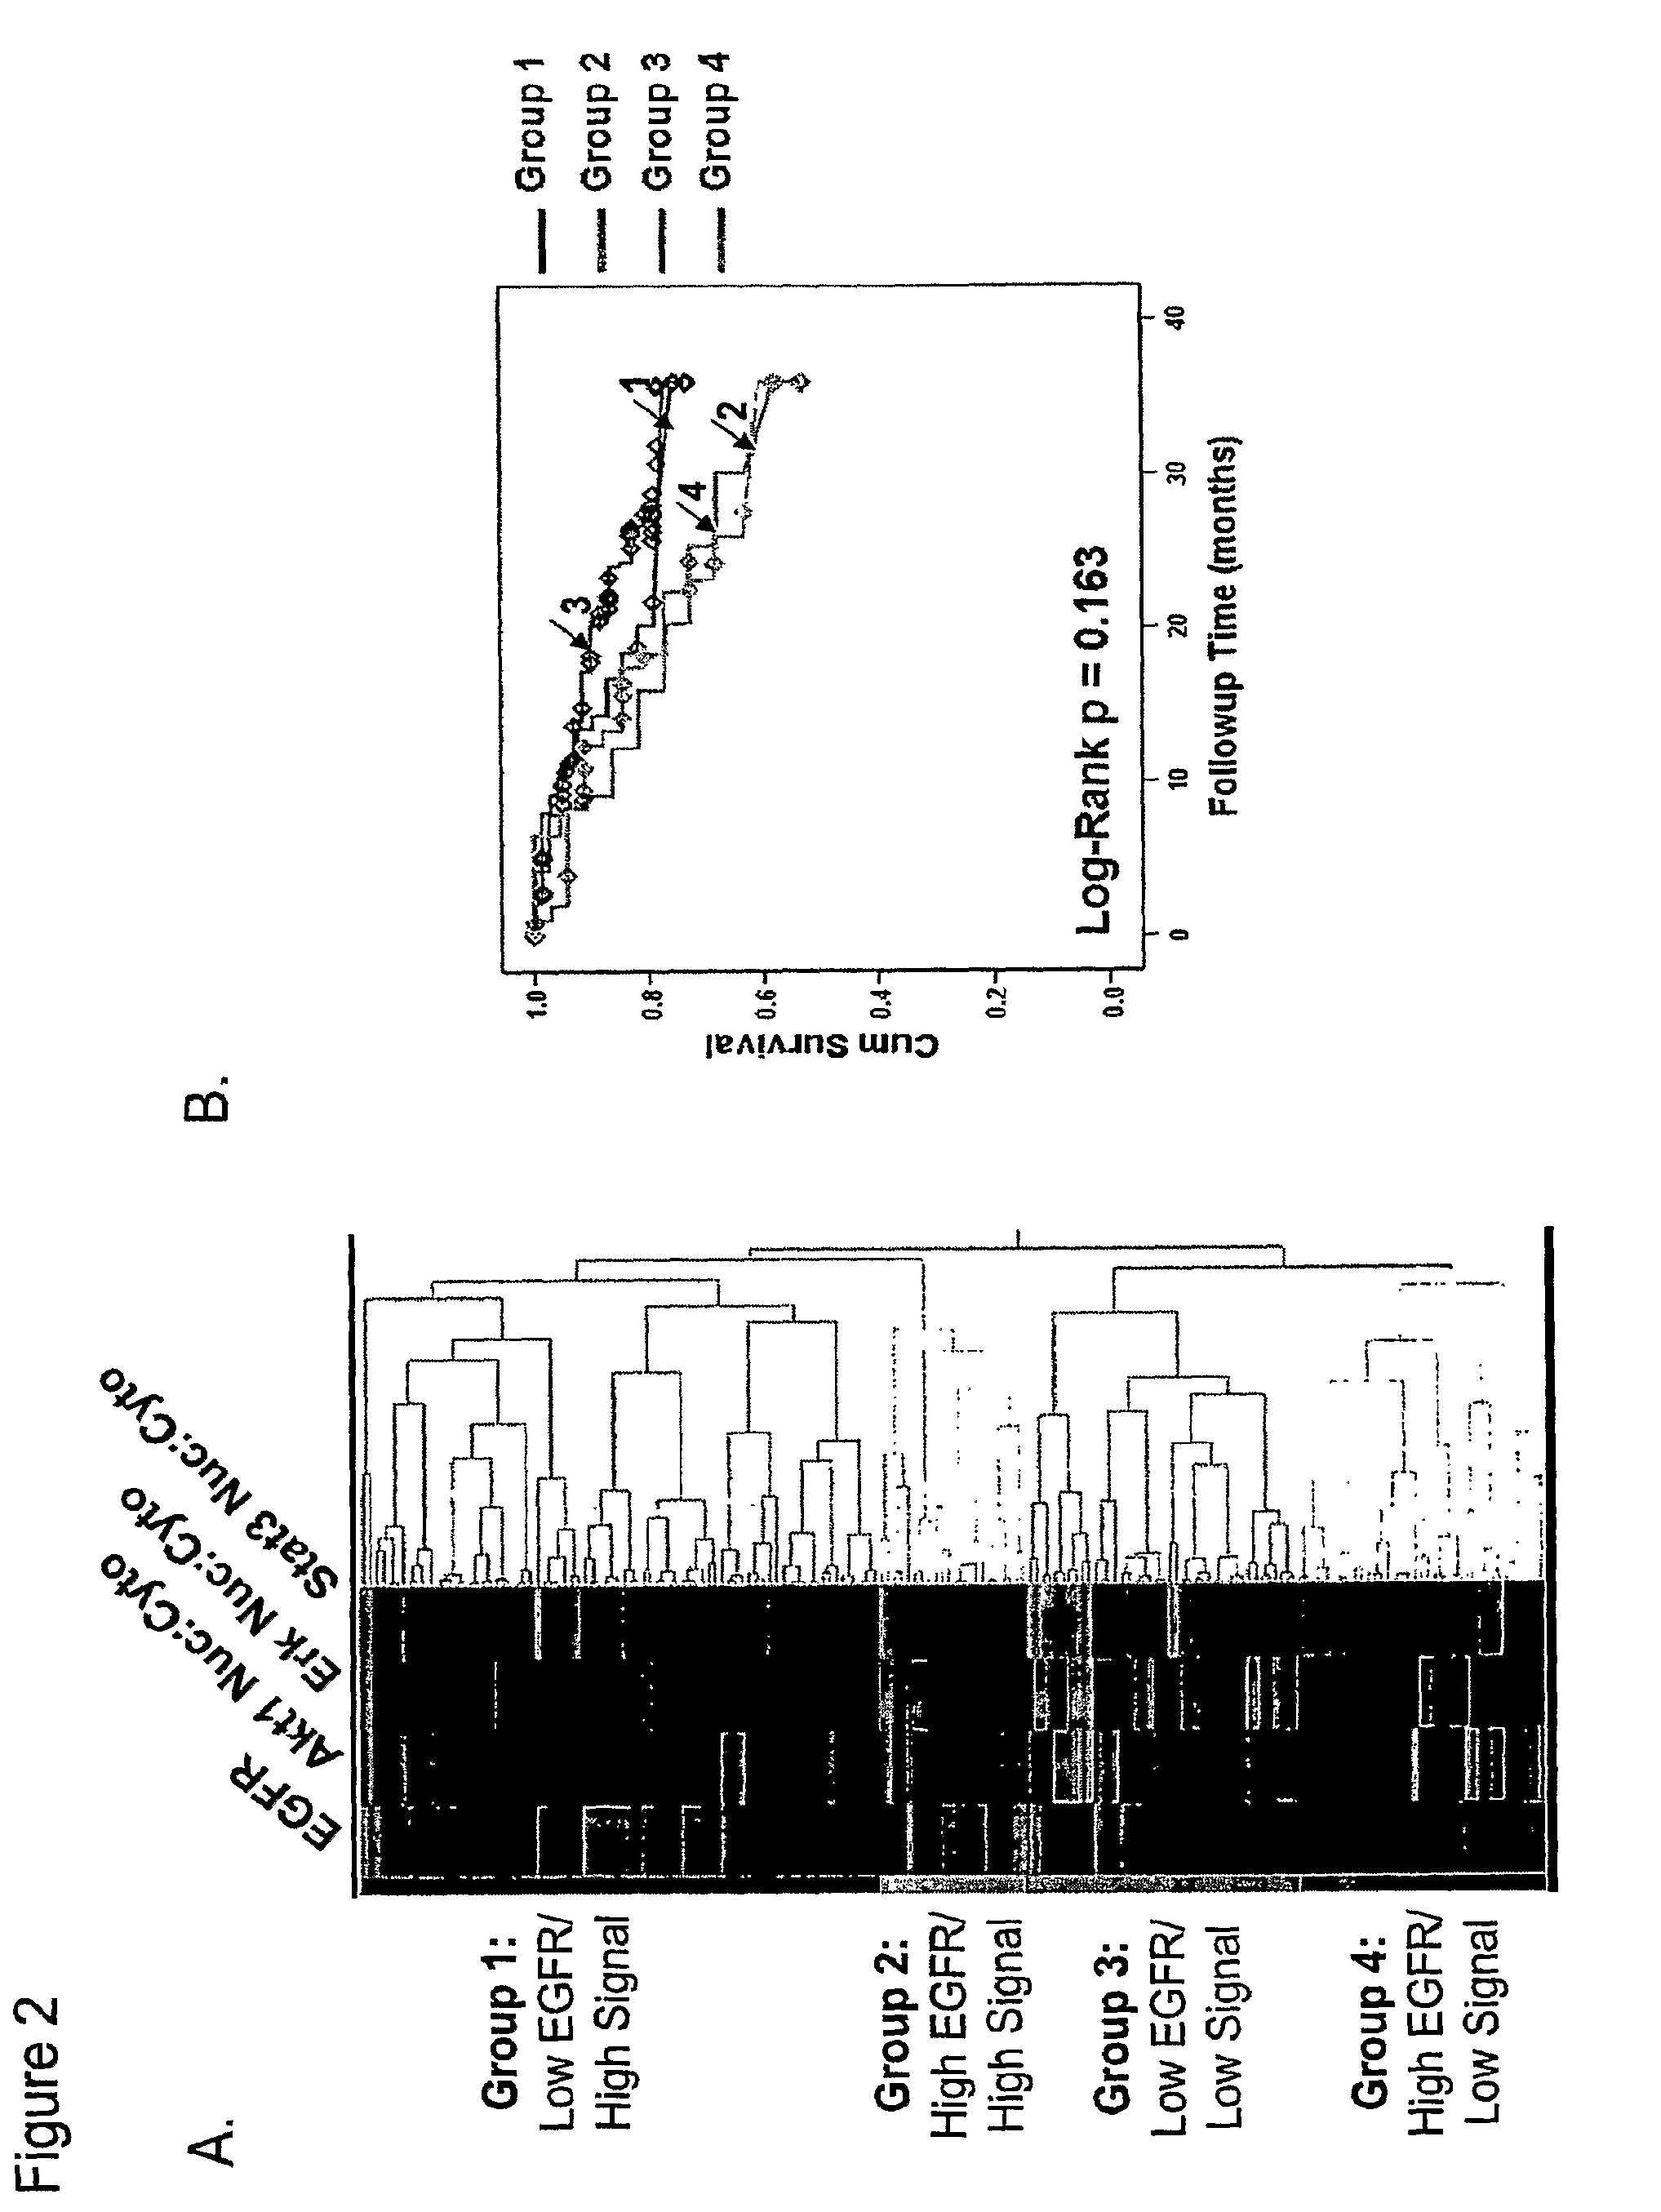 Methods for determining signal transduction activity in tumors